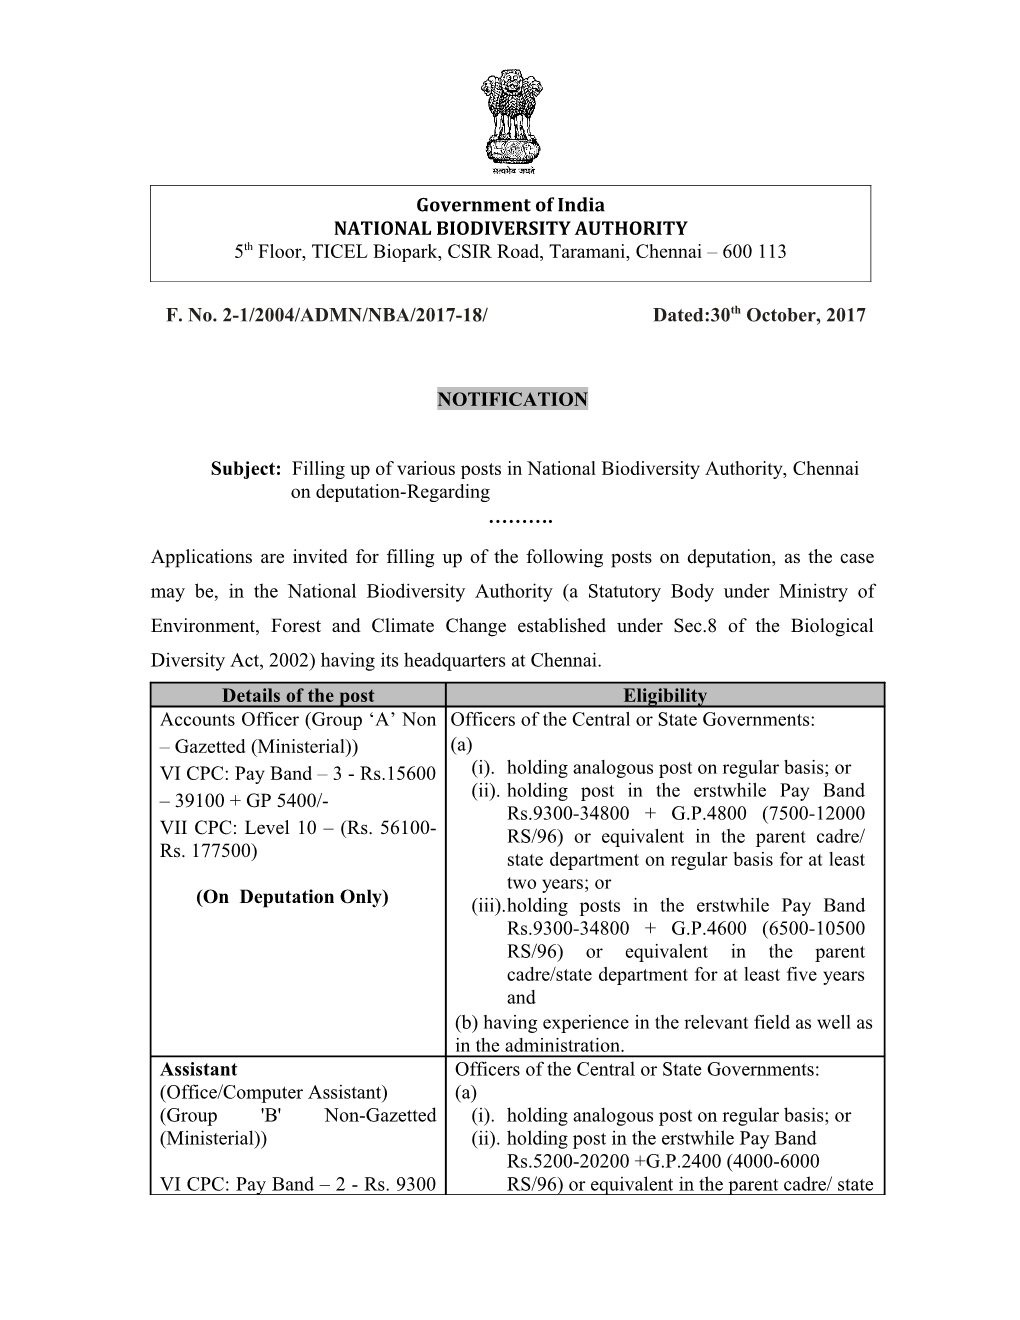 Subject: Filling up of Various Posts in National Biodiversity Authority, Chennai